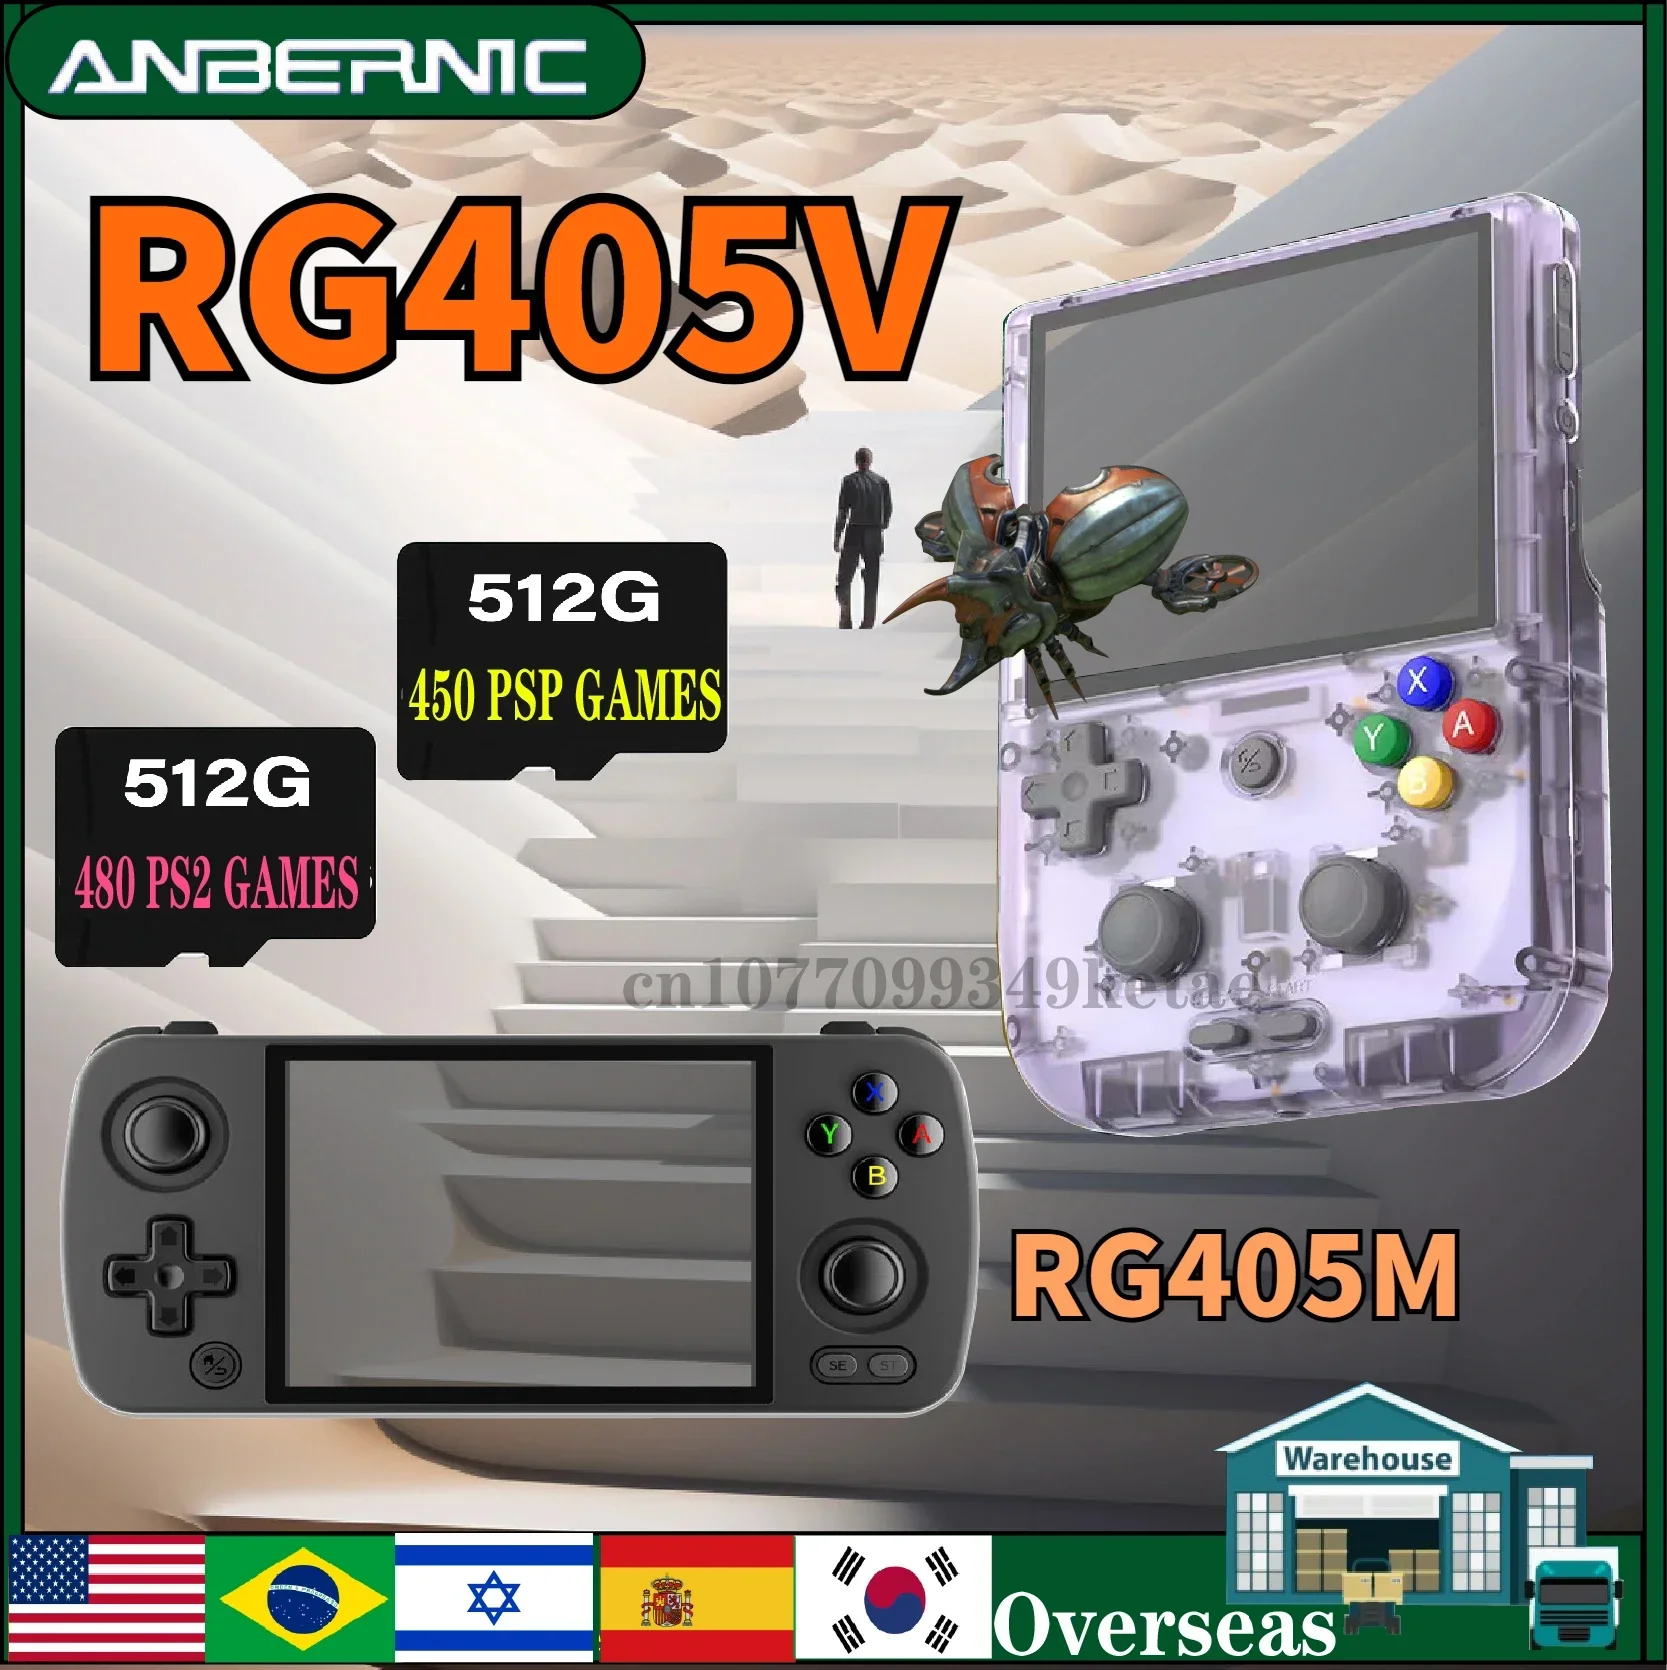 ANBERNIC RG405M engineering machine testing Wii/NGC/3DS games 